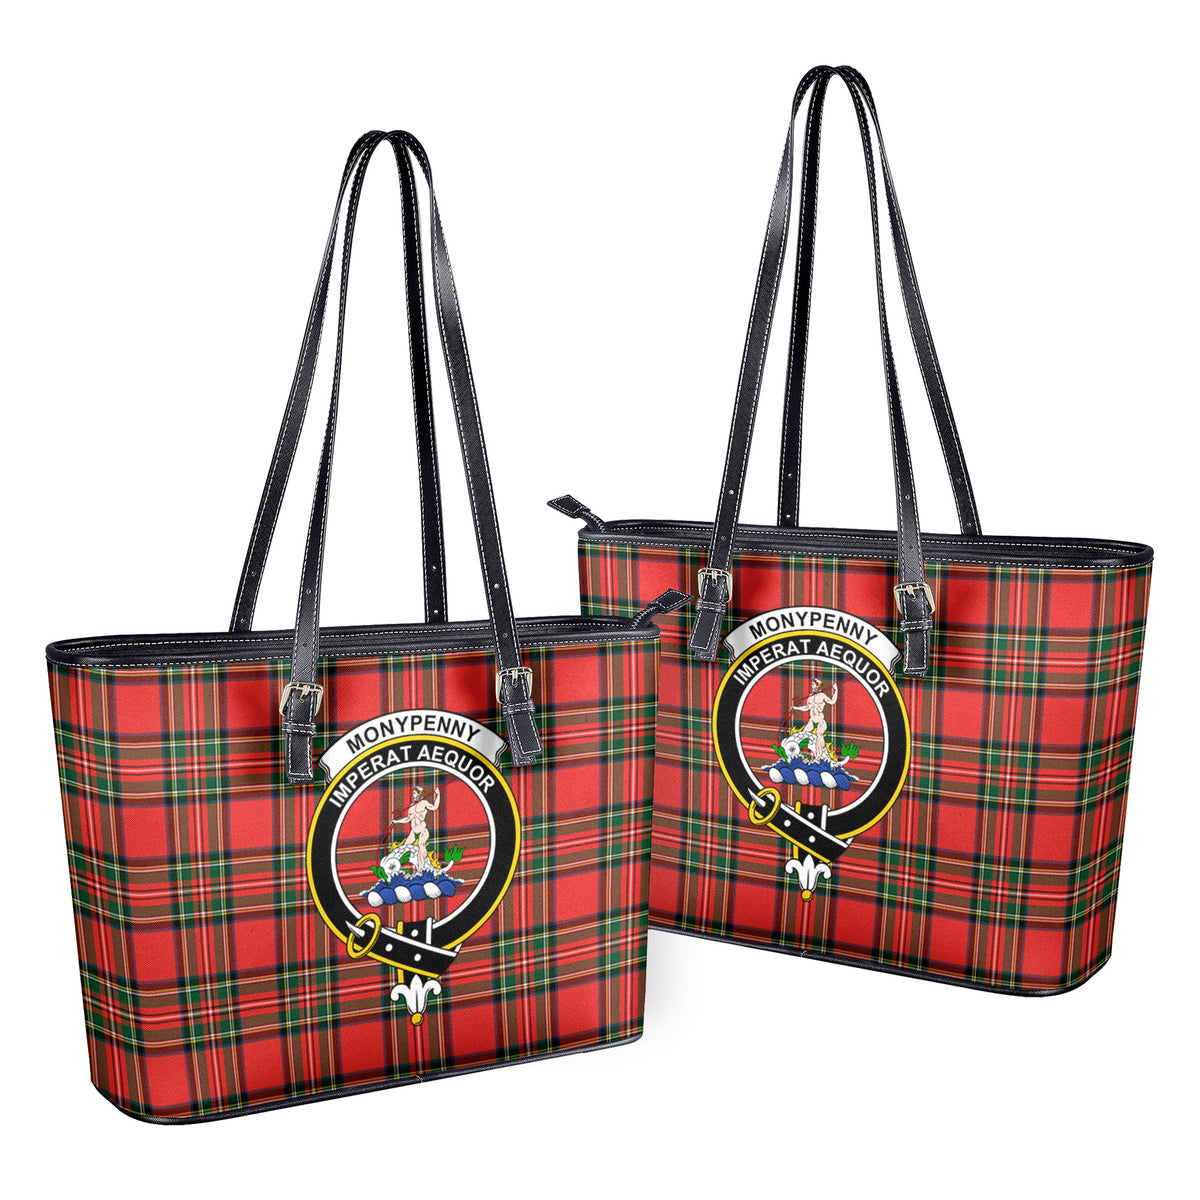 Monypenny Tartan Crest Leather Tote Bag